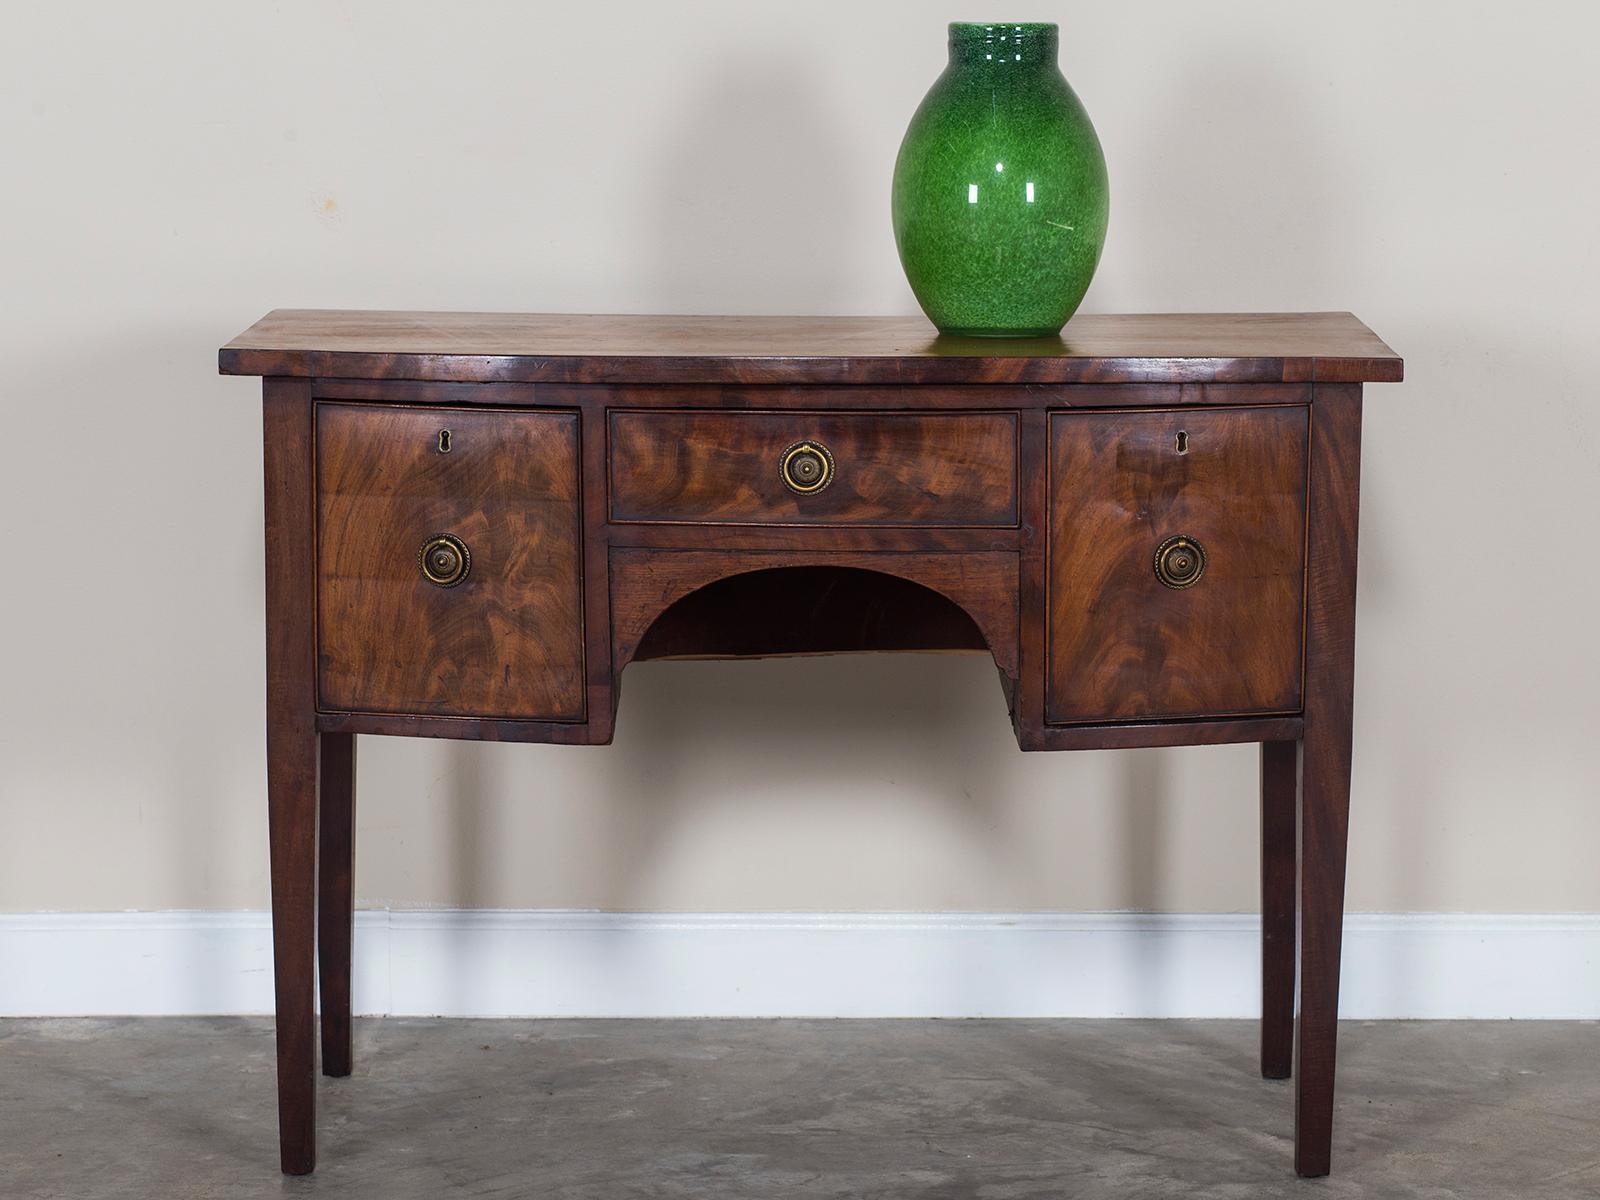 The simplicity of this antique English George III period bow front sideboard table circa 1820 gives it a certain modern quality. Please enlarge and zoom on the additional photographs to see the superb quality of the mahogany used on this antique